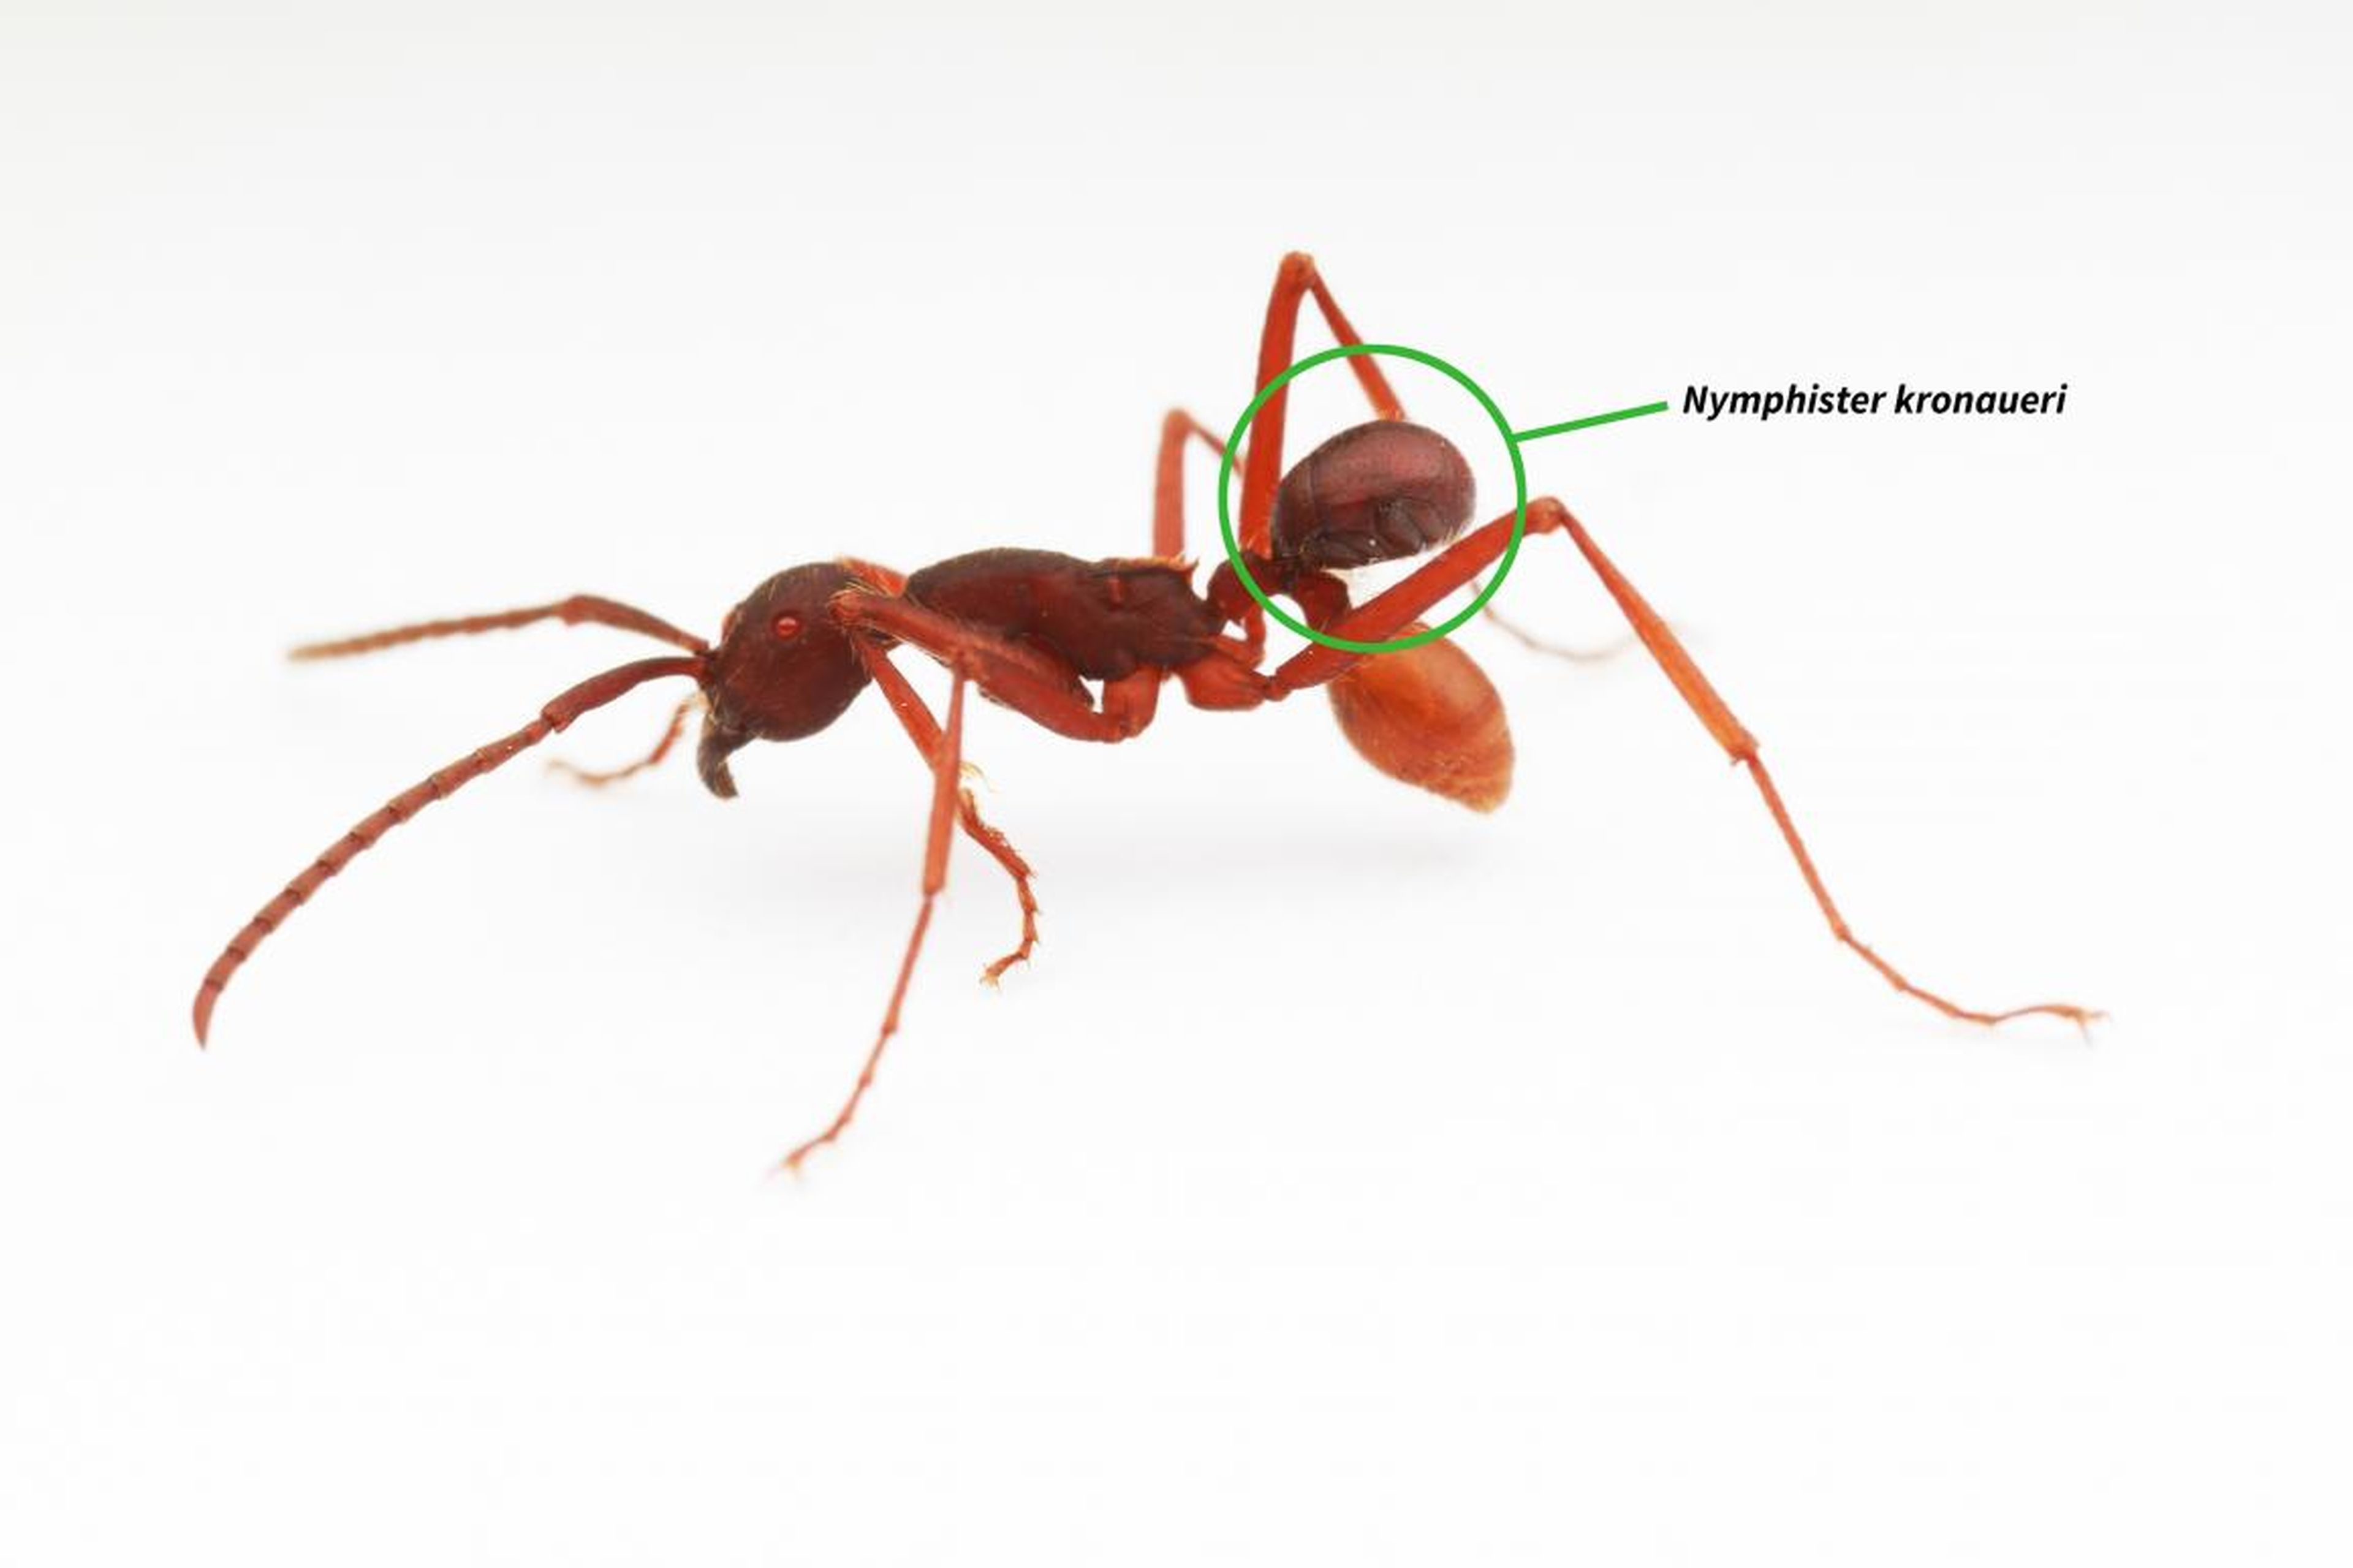 The <em>Nymphister kronaueri</em> isn't an ant — it's a tiny beetle that disguises itself as the abdomen of an army ant.